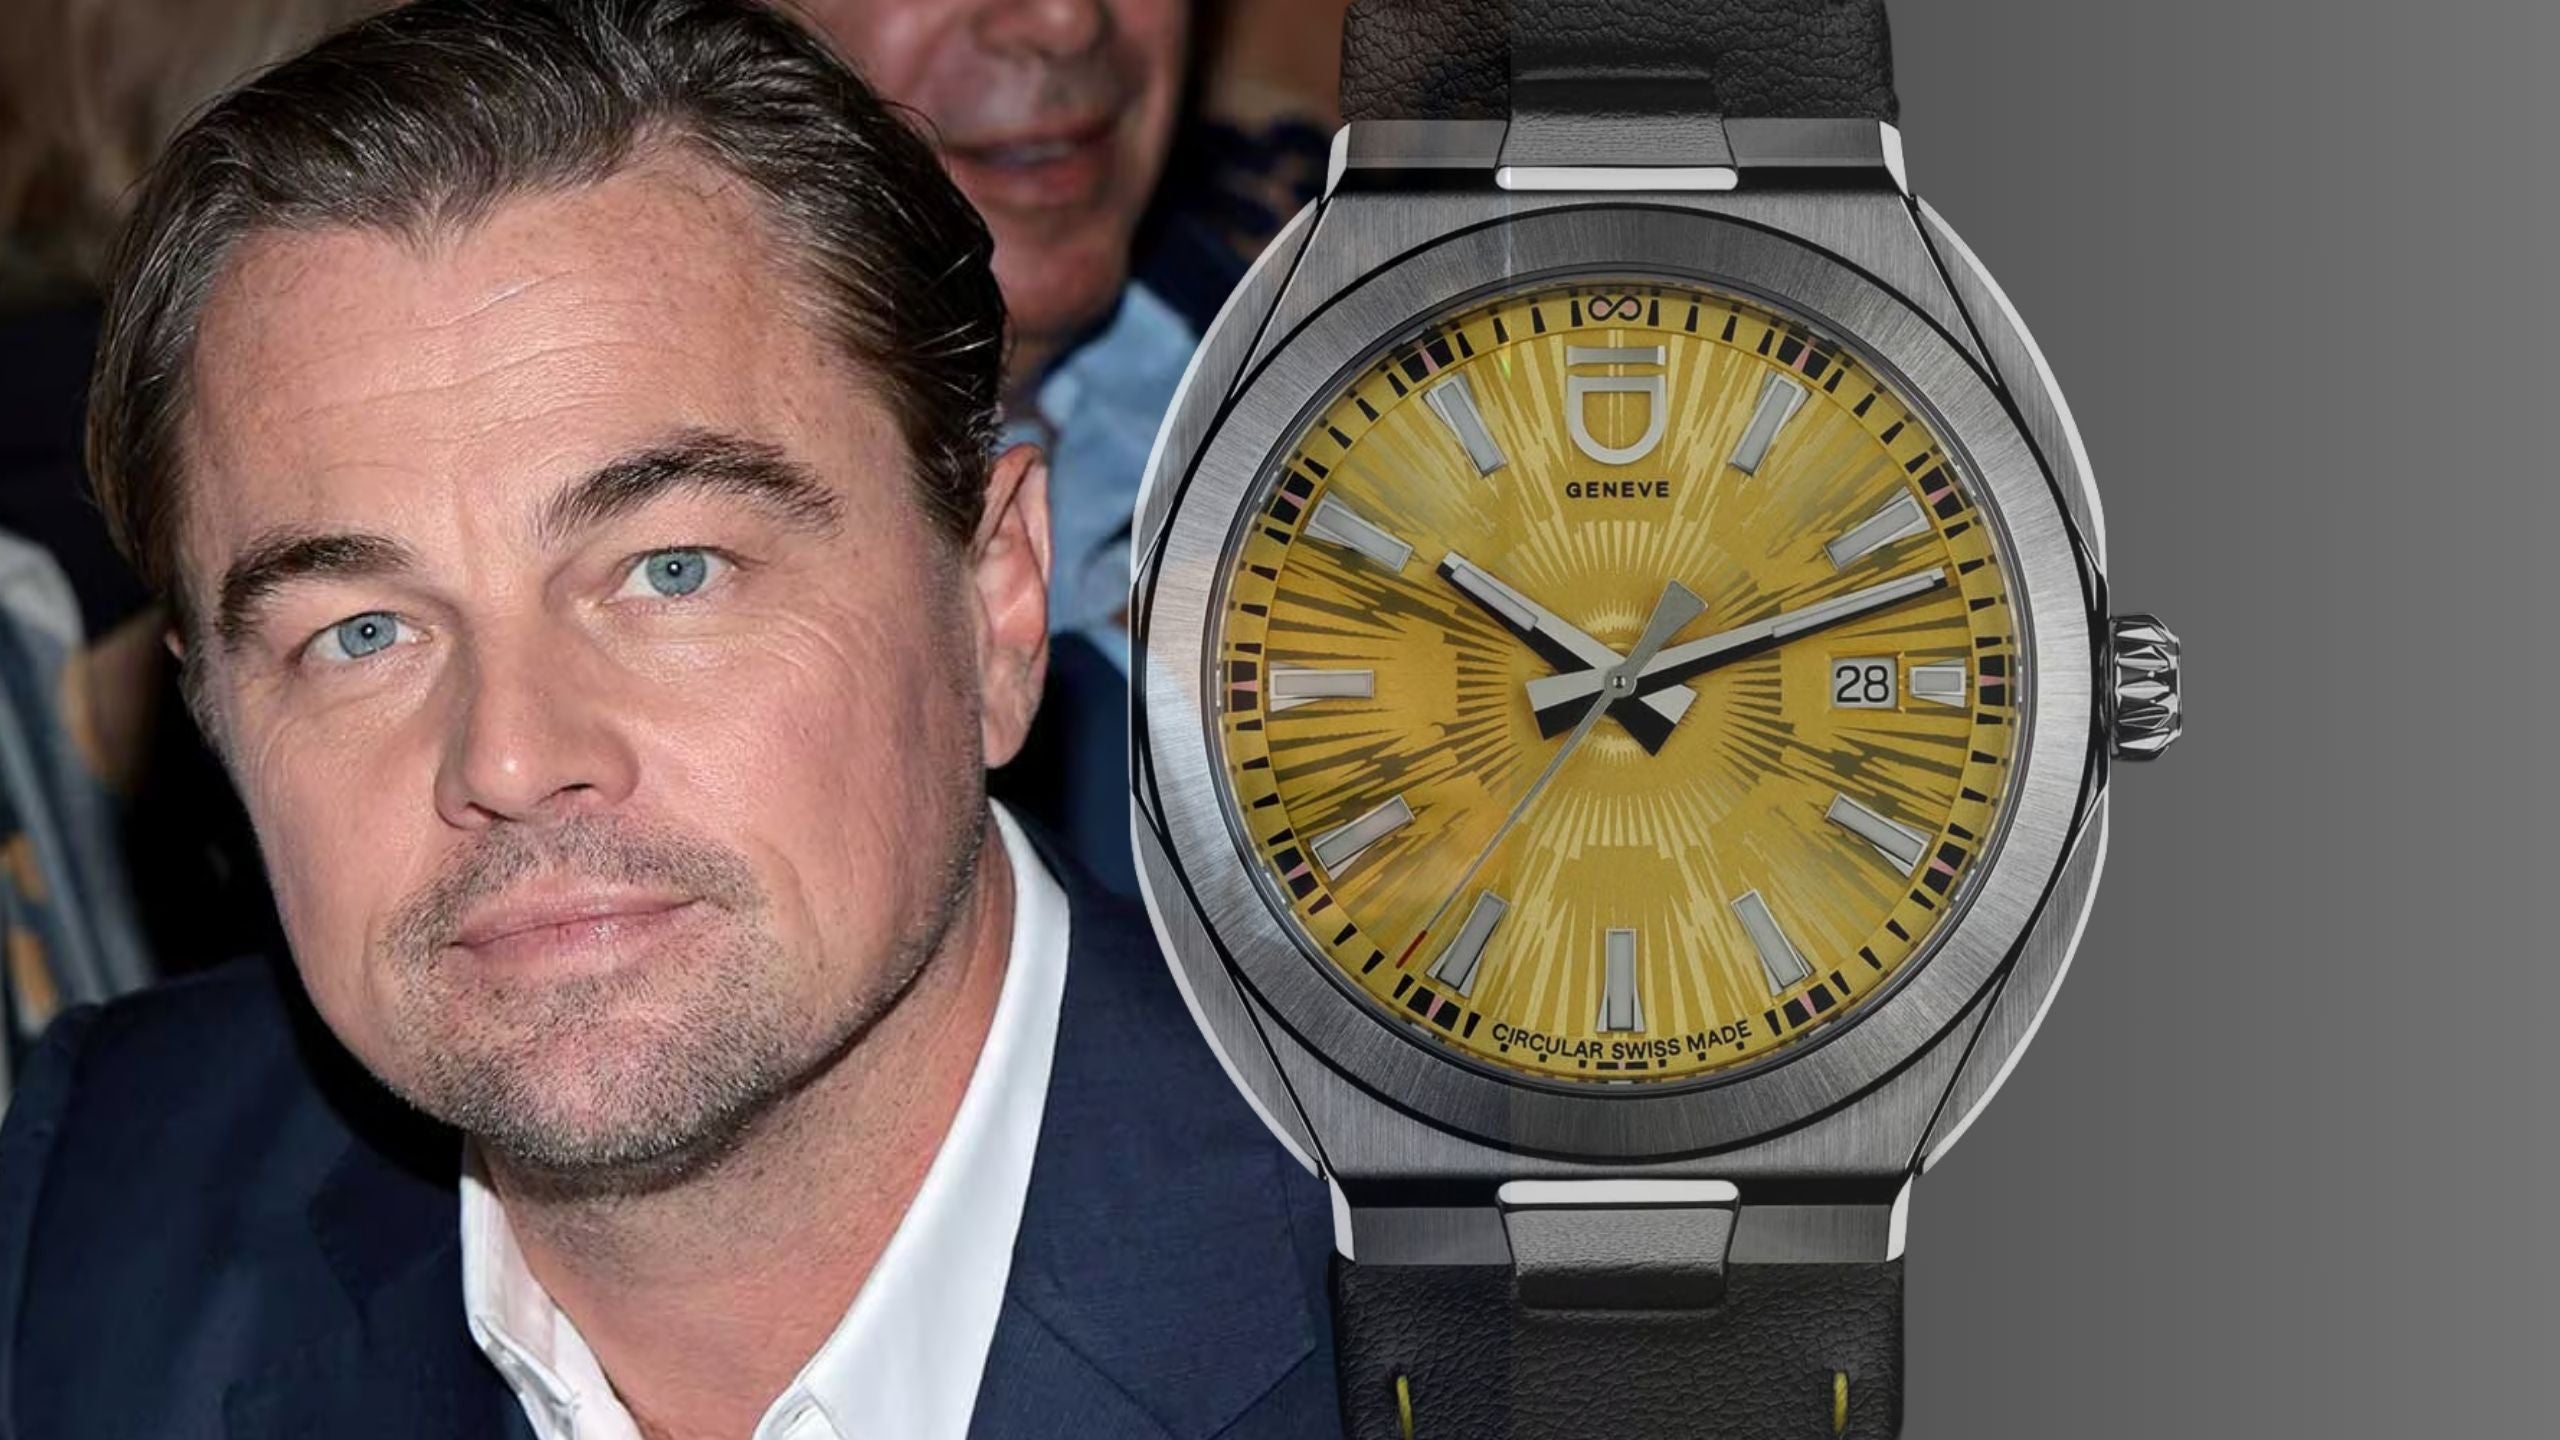 Leonardo DiCaprio takes part in a $2 Million investment round by ID Genève’s